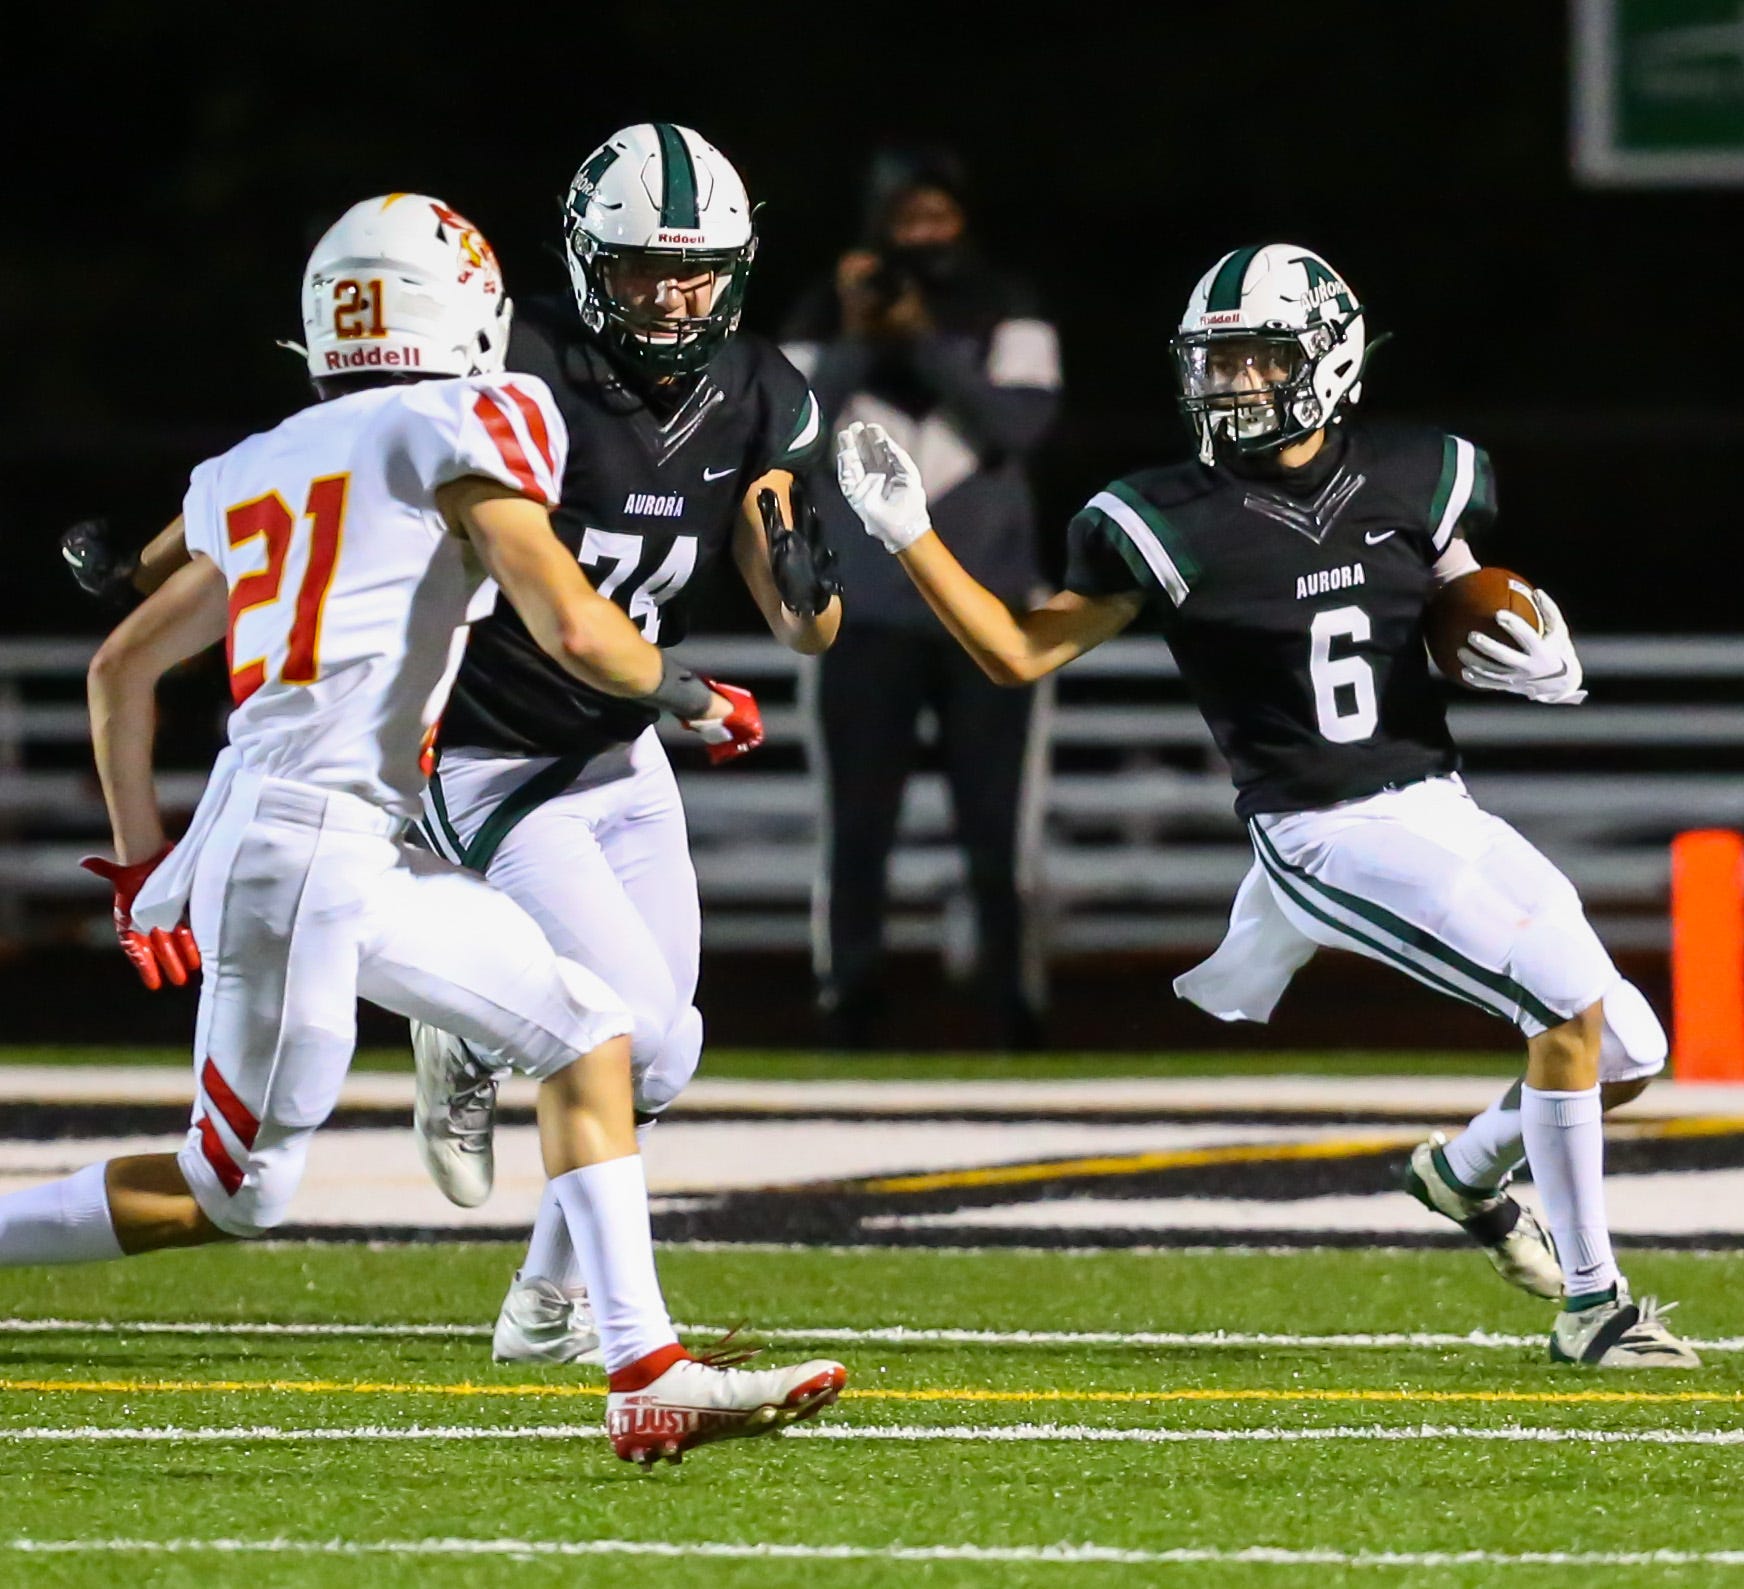 Aurora football opens 2020 with home loss to Brecksville 35-21